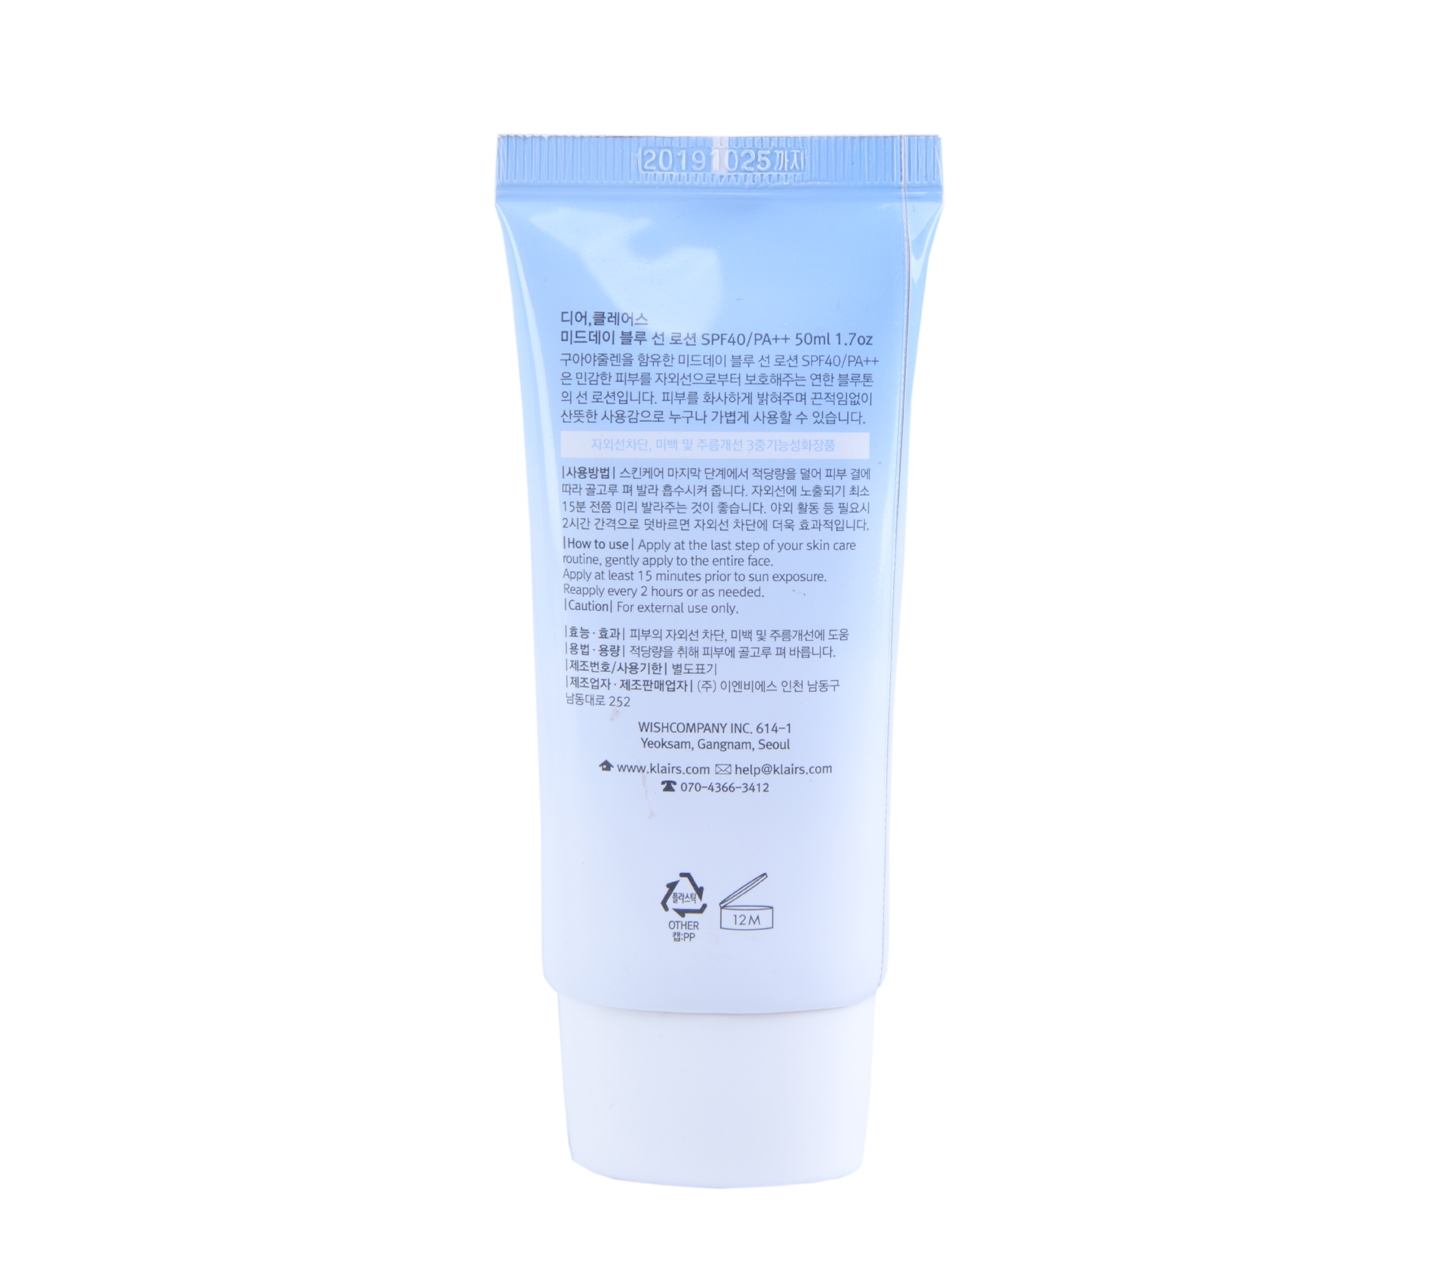 Klairs Mid-day Blue Sun Lotion SPF40/PA++ Faces